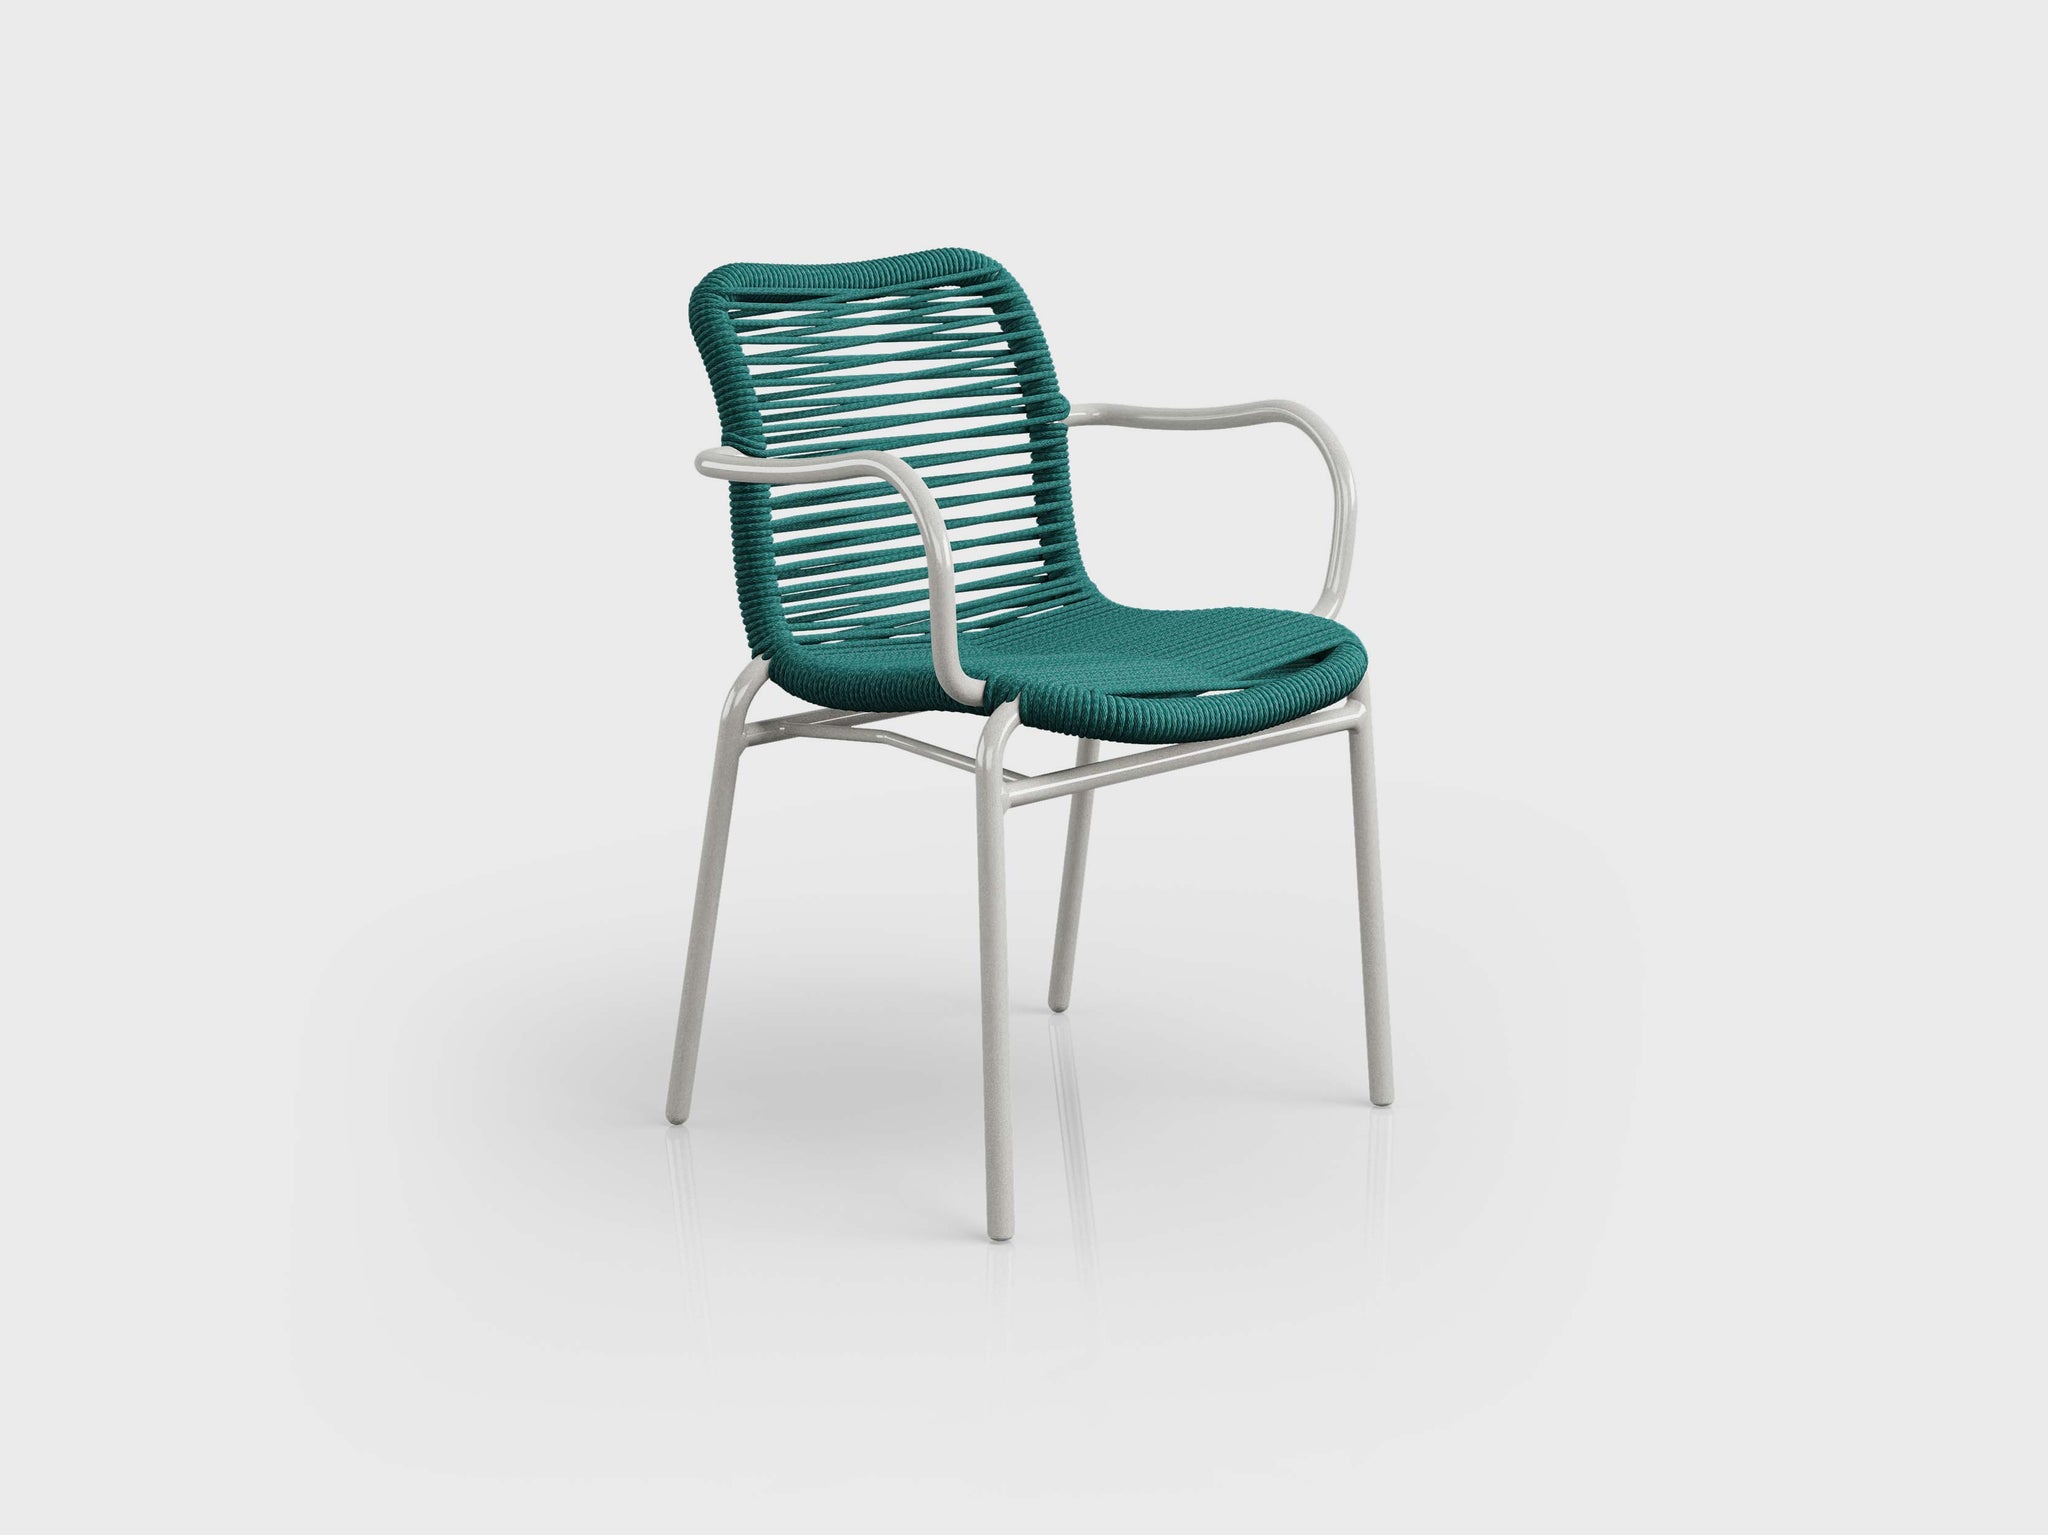 Rio Armchair made of aluminium structure with rope finishing, designed by Luciano Mandelli